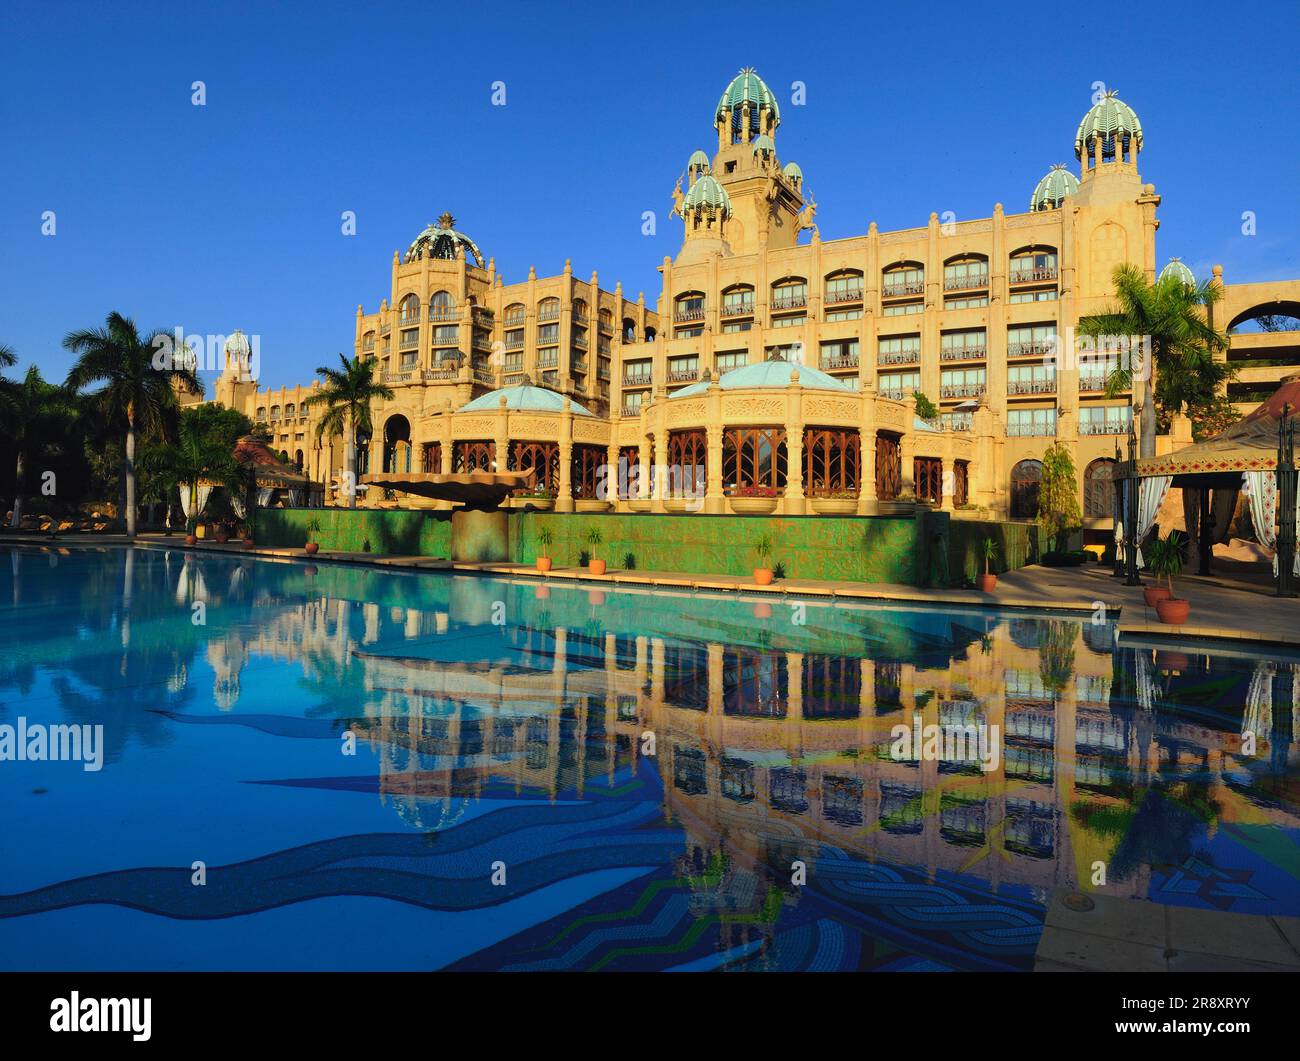 Pool at The Palace of the Lost City, Sun City, North West, South Africa Stock Photo